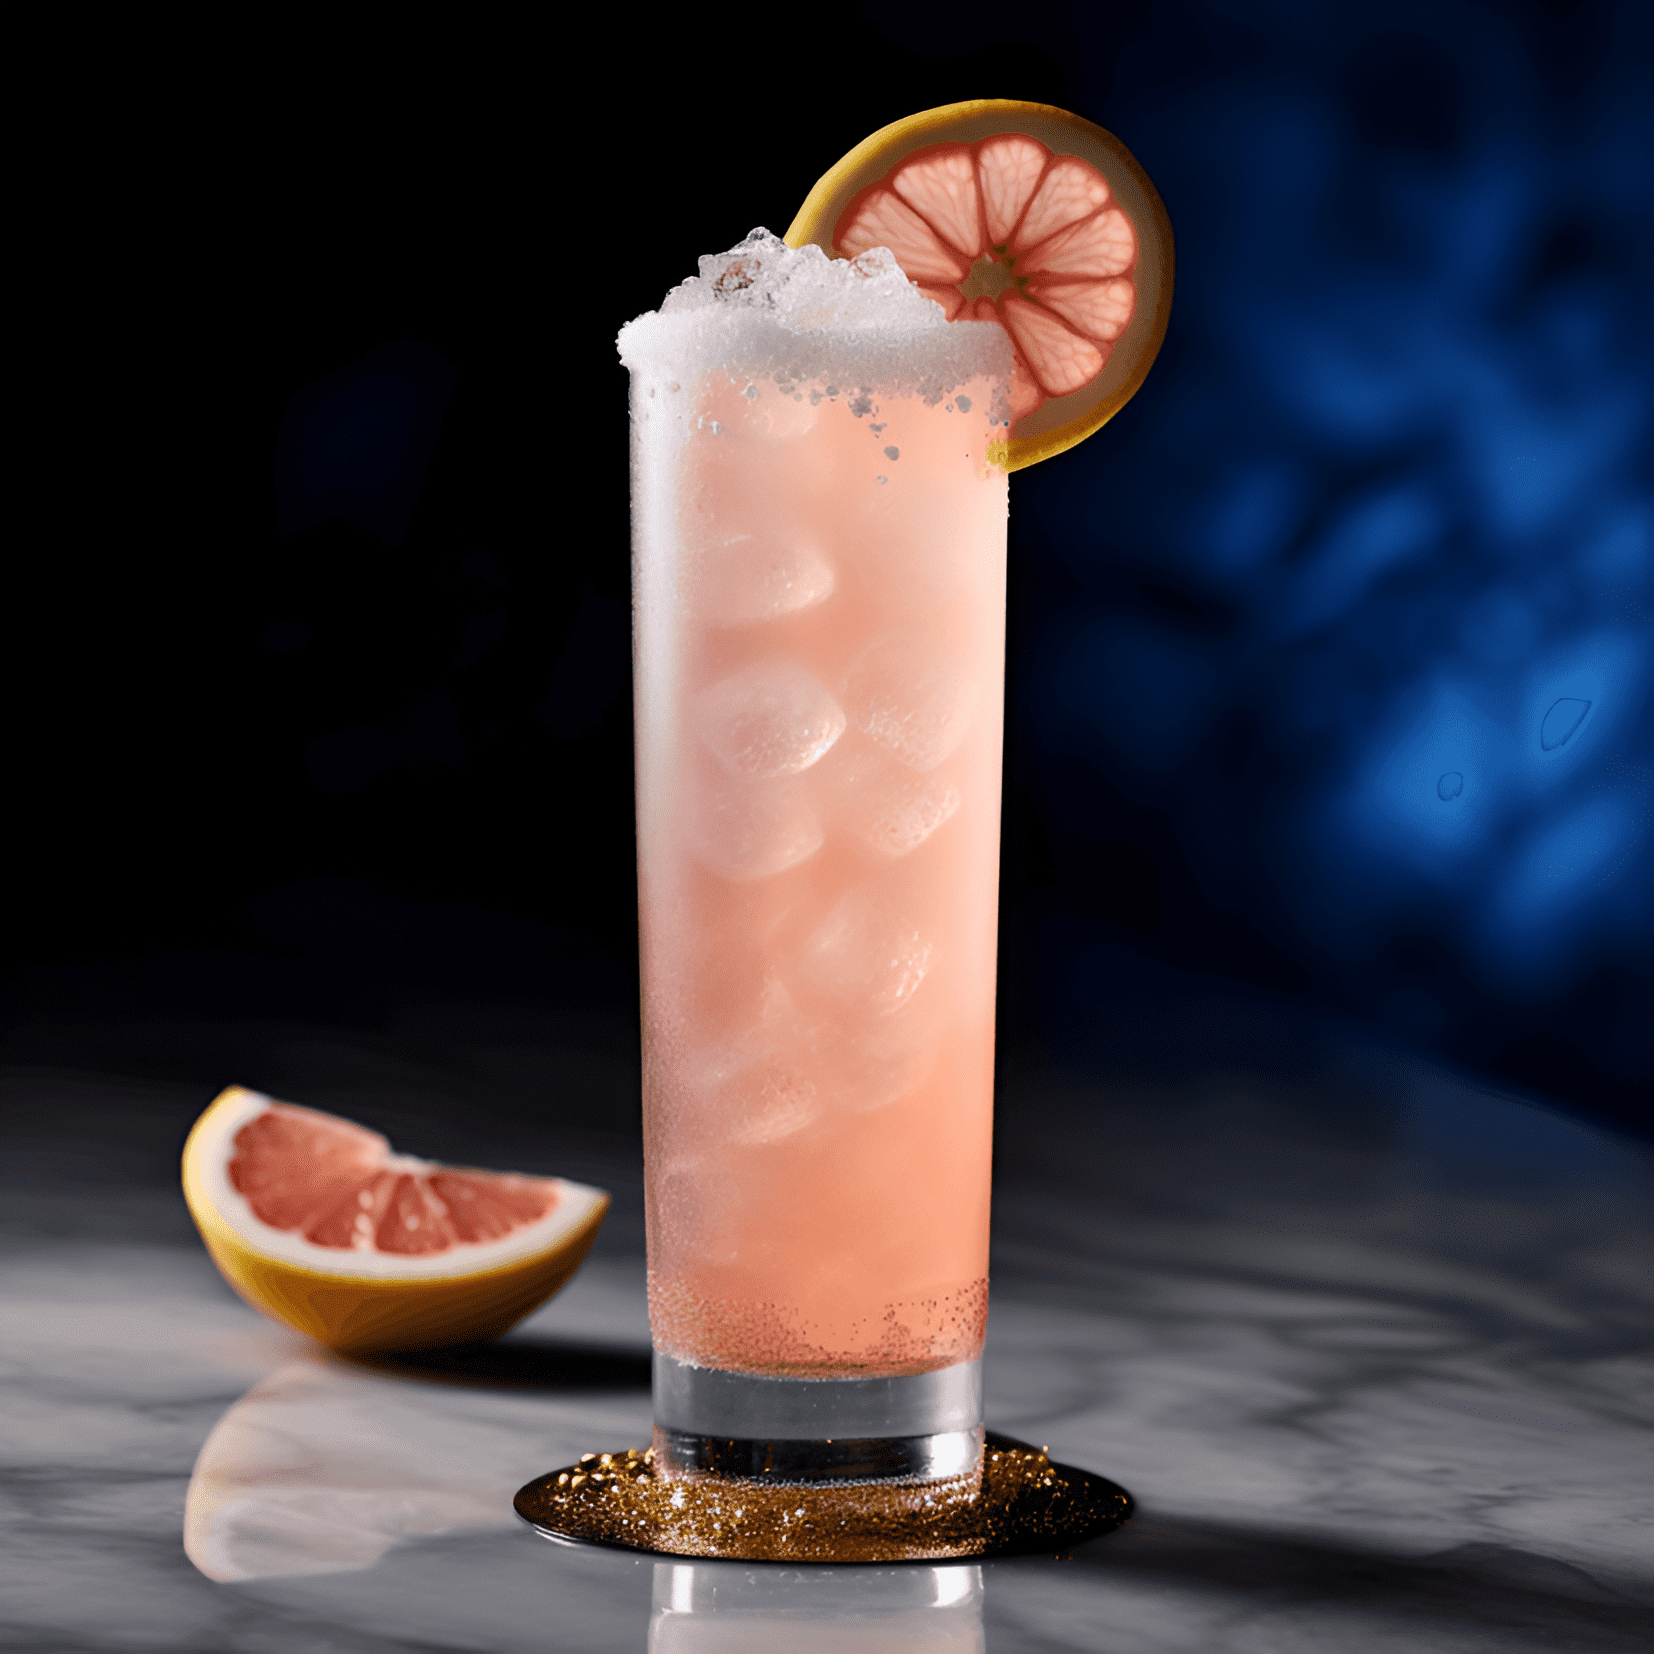 Salty Dog Cocktail Recipe - The Salty Dog cocktail offers a delightful balance of flavors, with the tartness of grapefruit juice and the sweetness of gin or vodka. The salted rim adds a savory touch, making it a refreshing and satisfying drink.